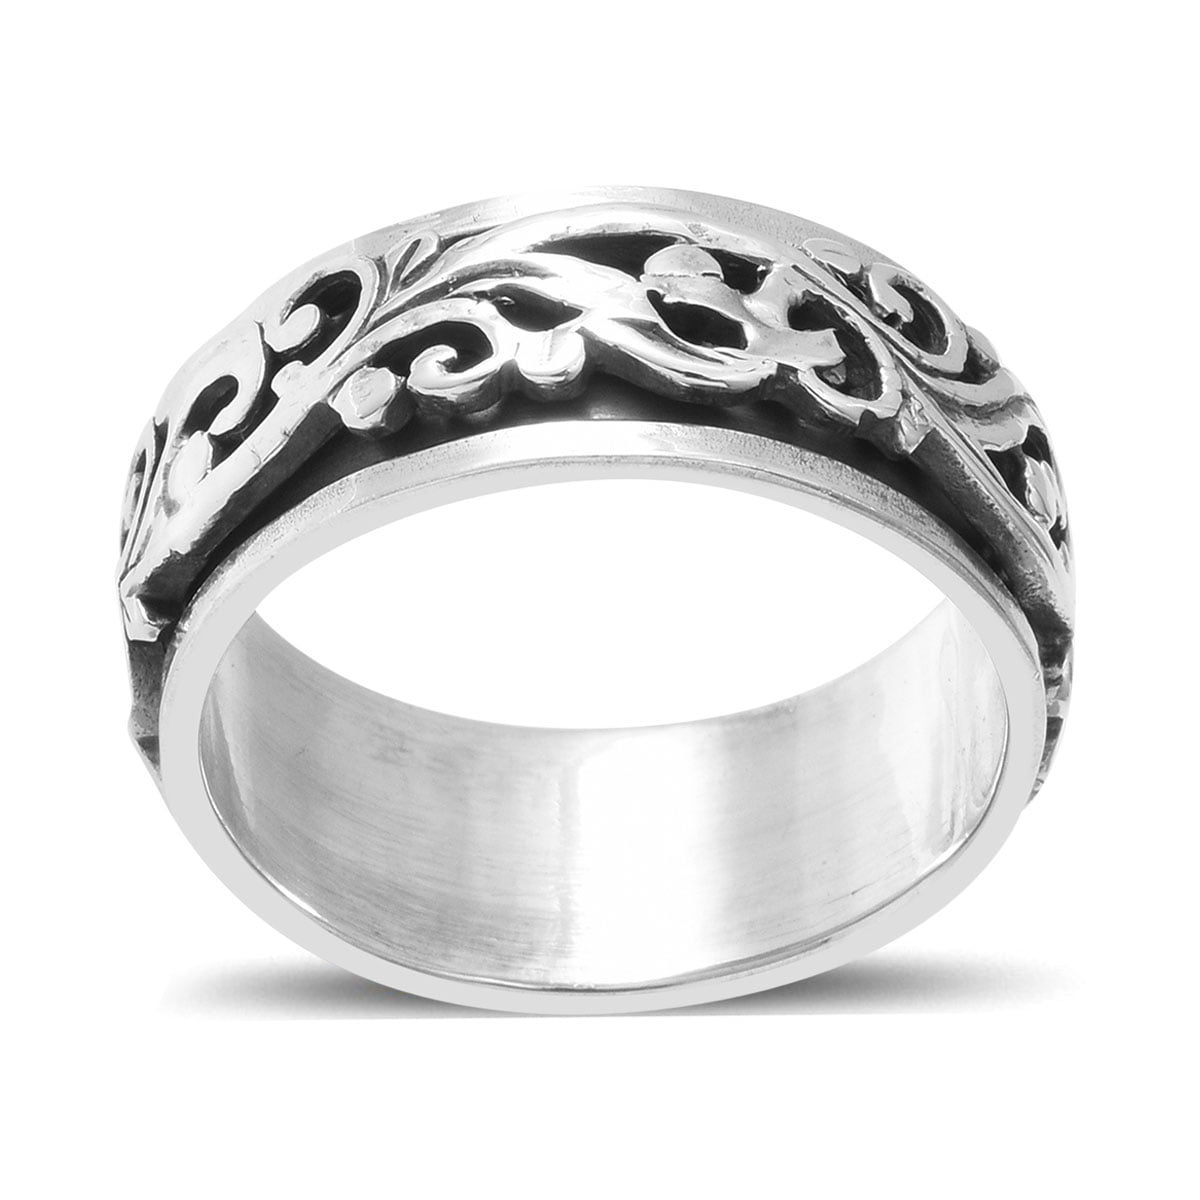 Solid Flower Celtic Design Fashion .925 Sterling Silver Ring Sizes 5-11 